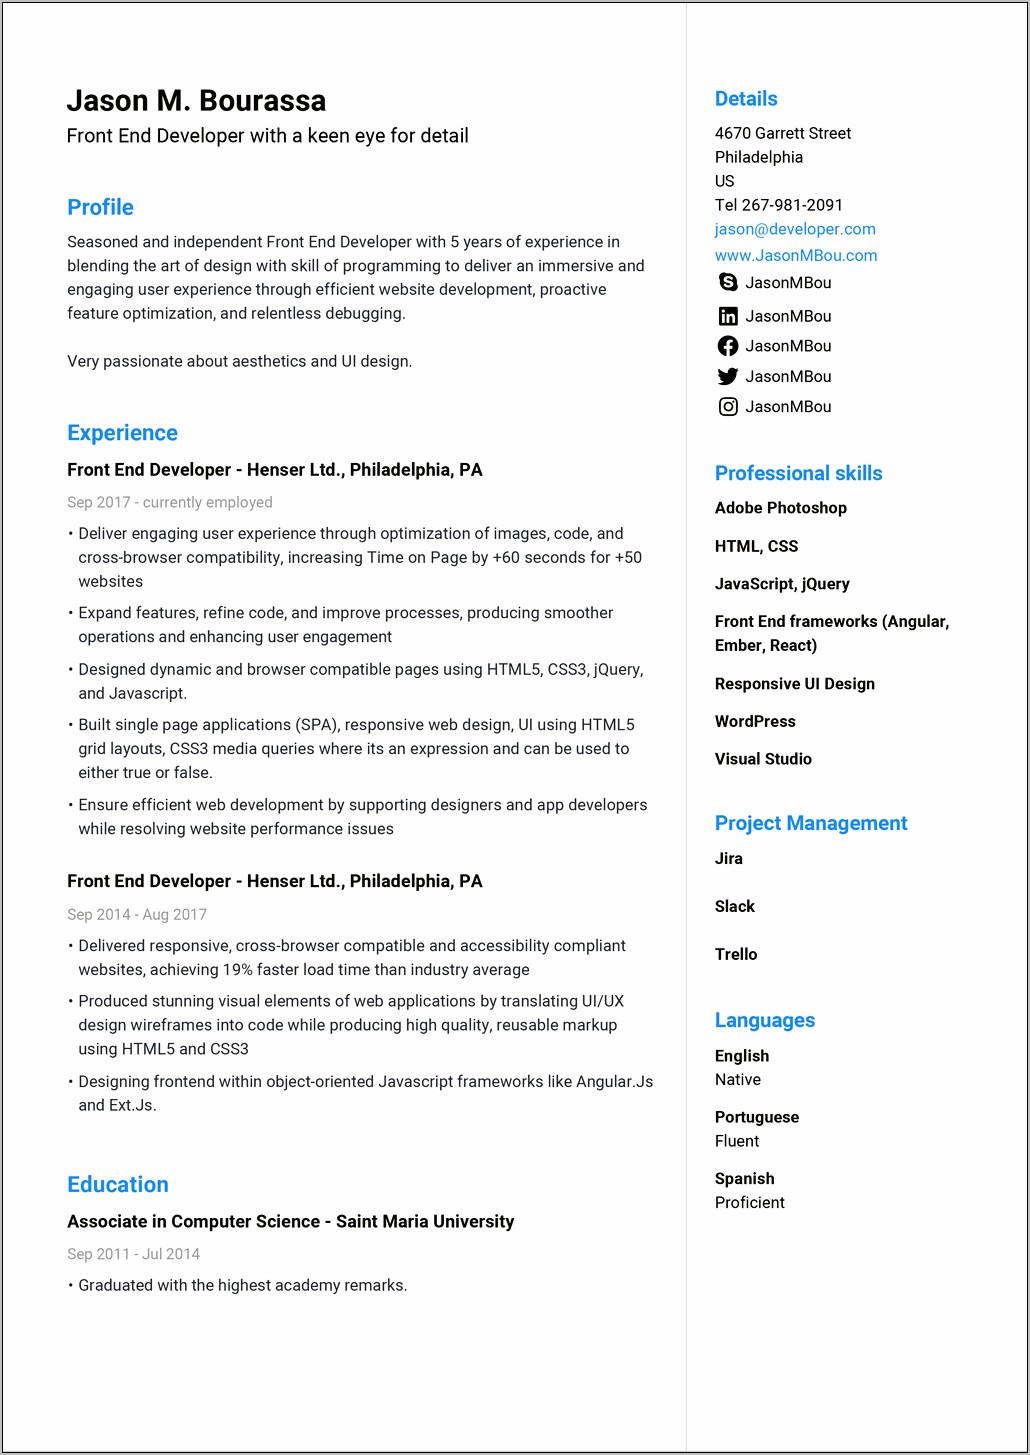 Resume Template Out Of Workforce For Long Time